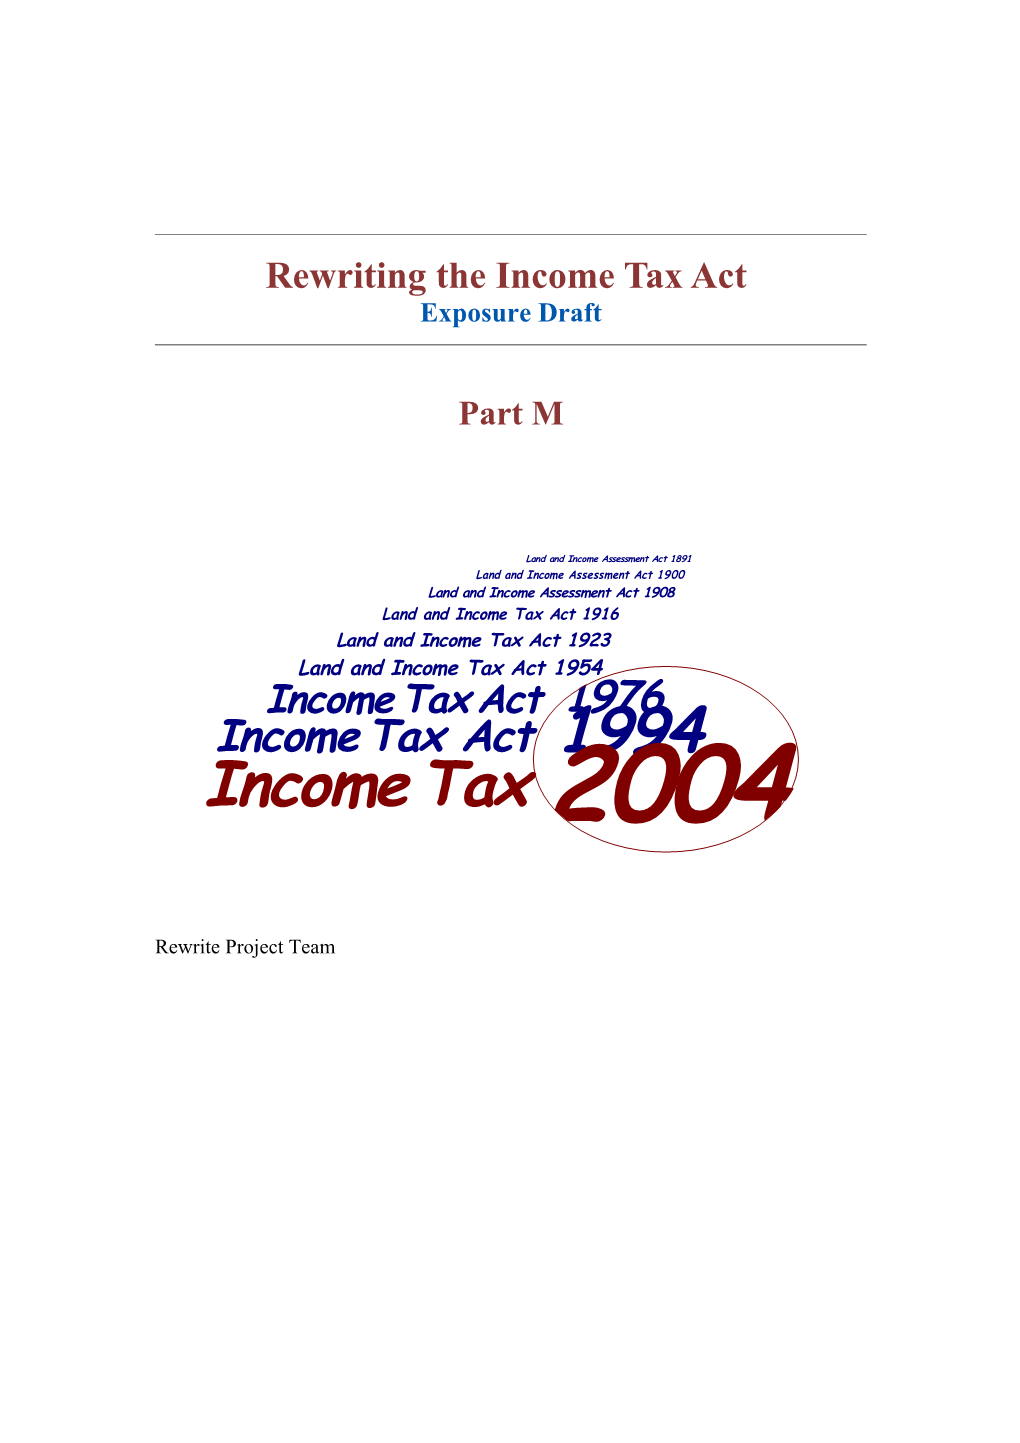 Rewriting the Income Tax Act - Exposure Draft - Part M Commentary